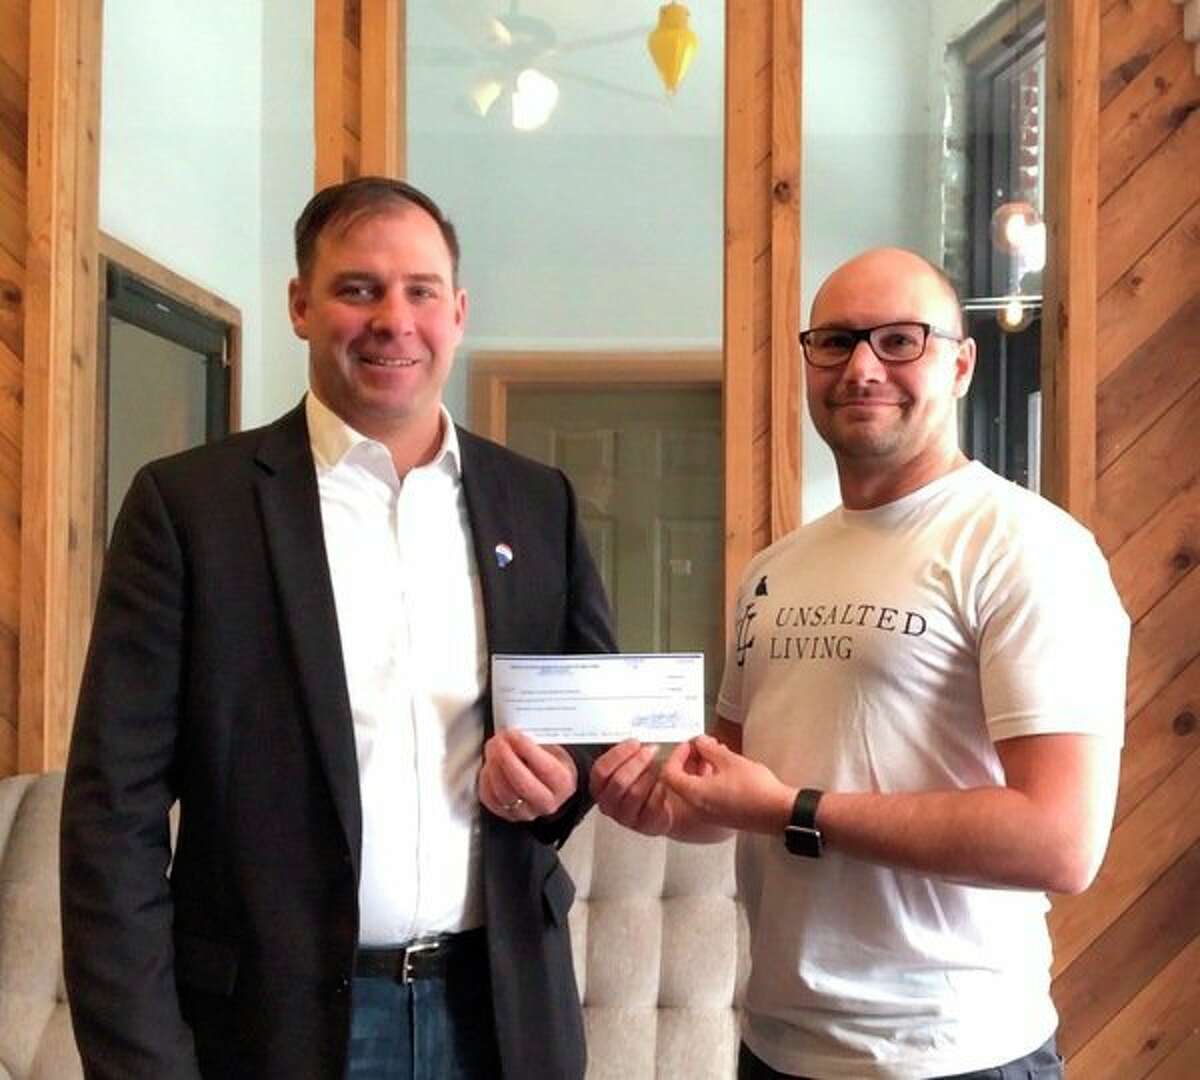 Randy Zakrajsek (left), Manistee County Habitat for Humanity Board President, accepts a donation from Brandon Ball, of Unsalted Living on behalf of the MOM Board of Realtors. (Courtesy photo)